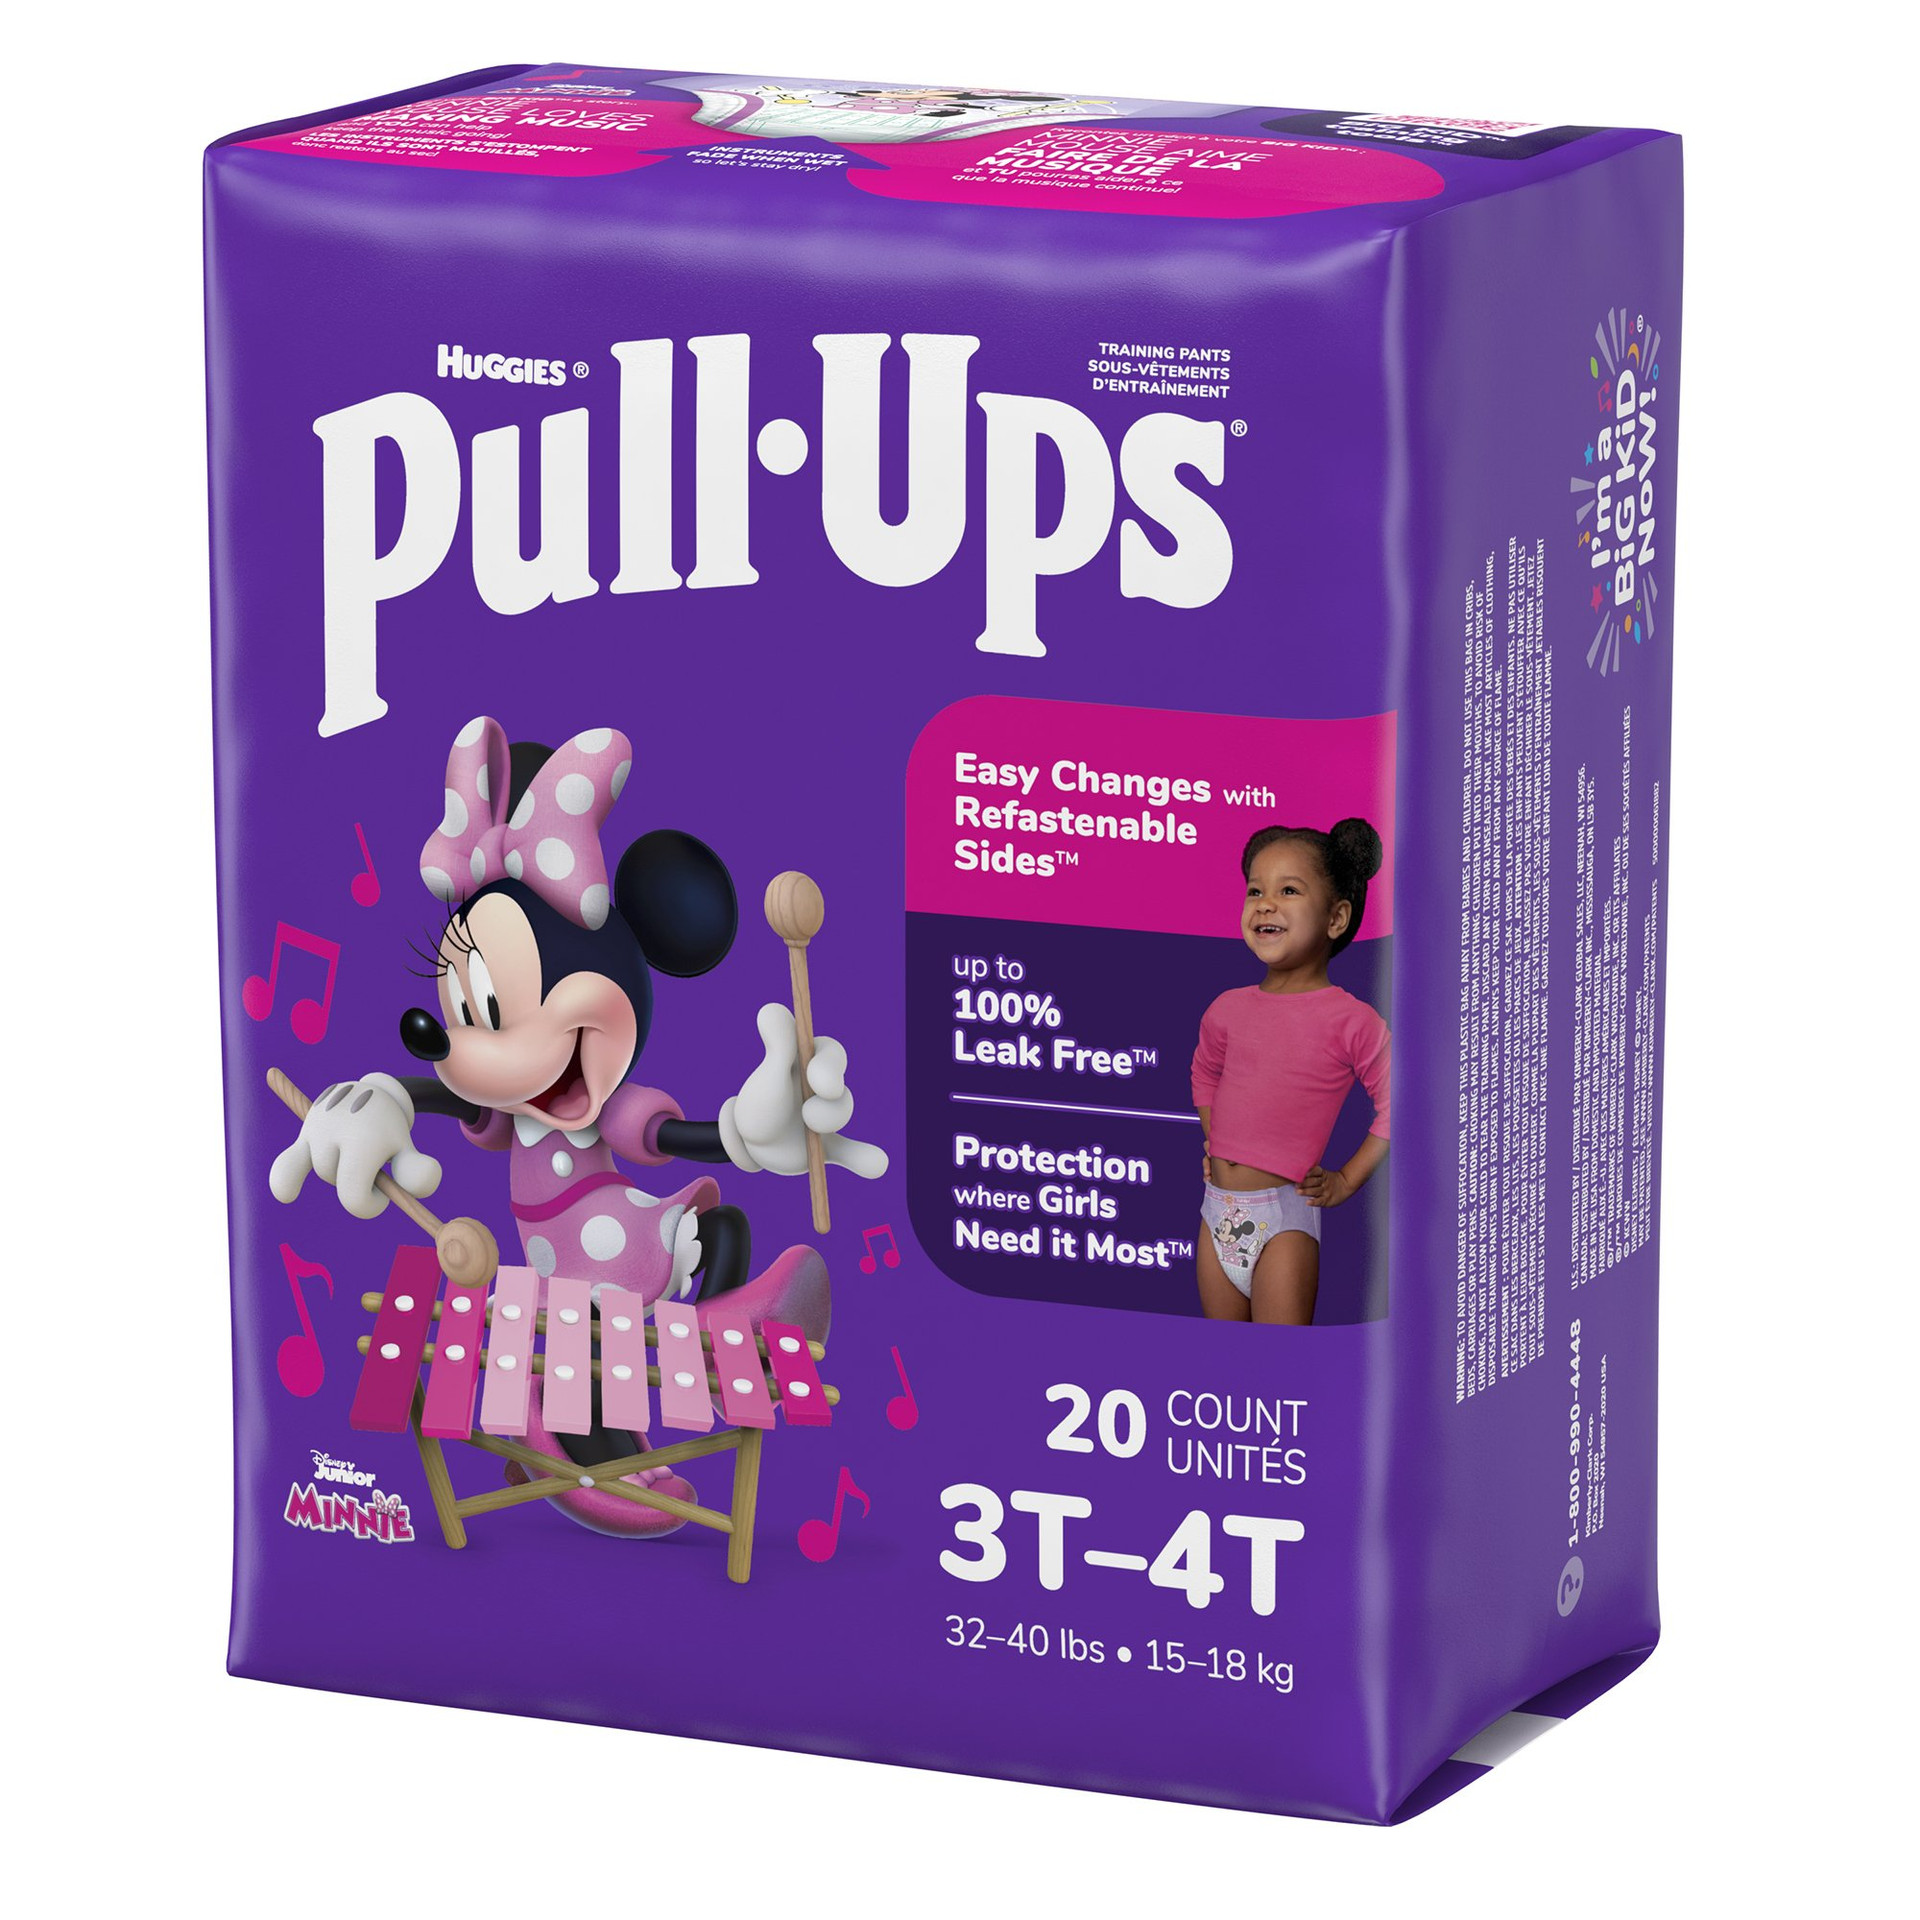 Huggies Pull Ups Toddler Training Pants For Girls Minnie Mouse Design